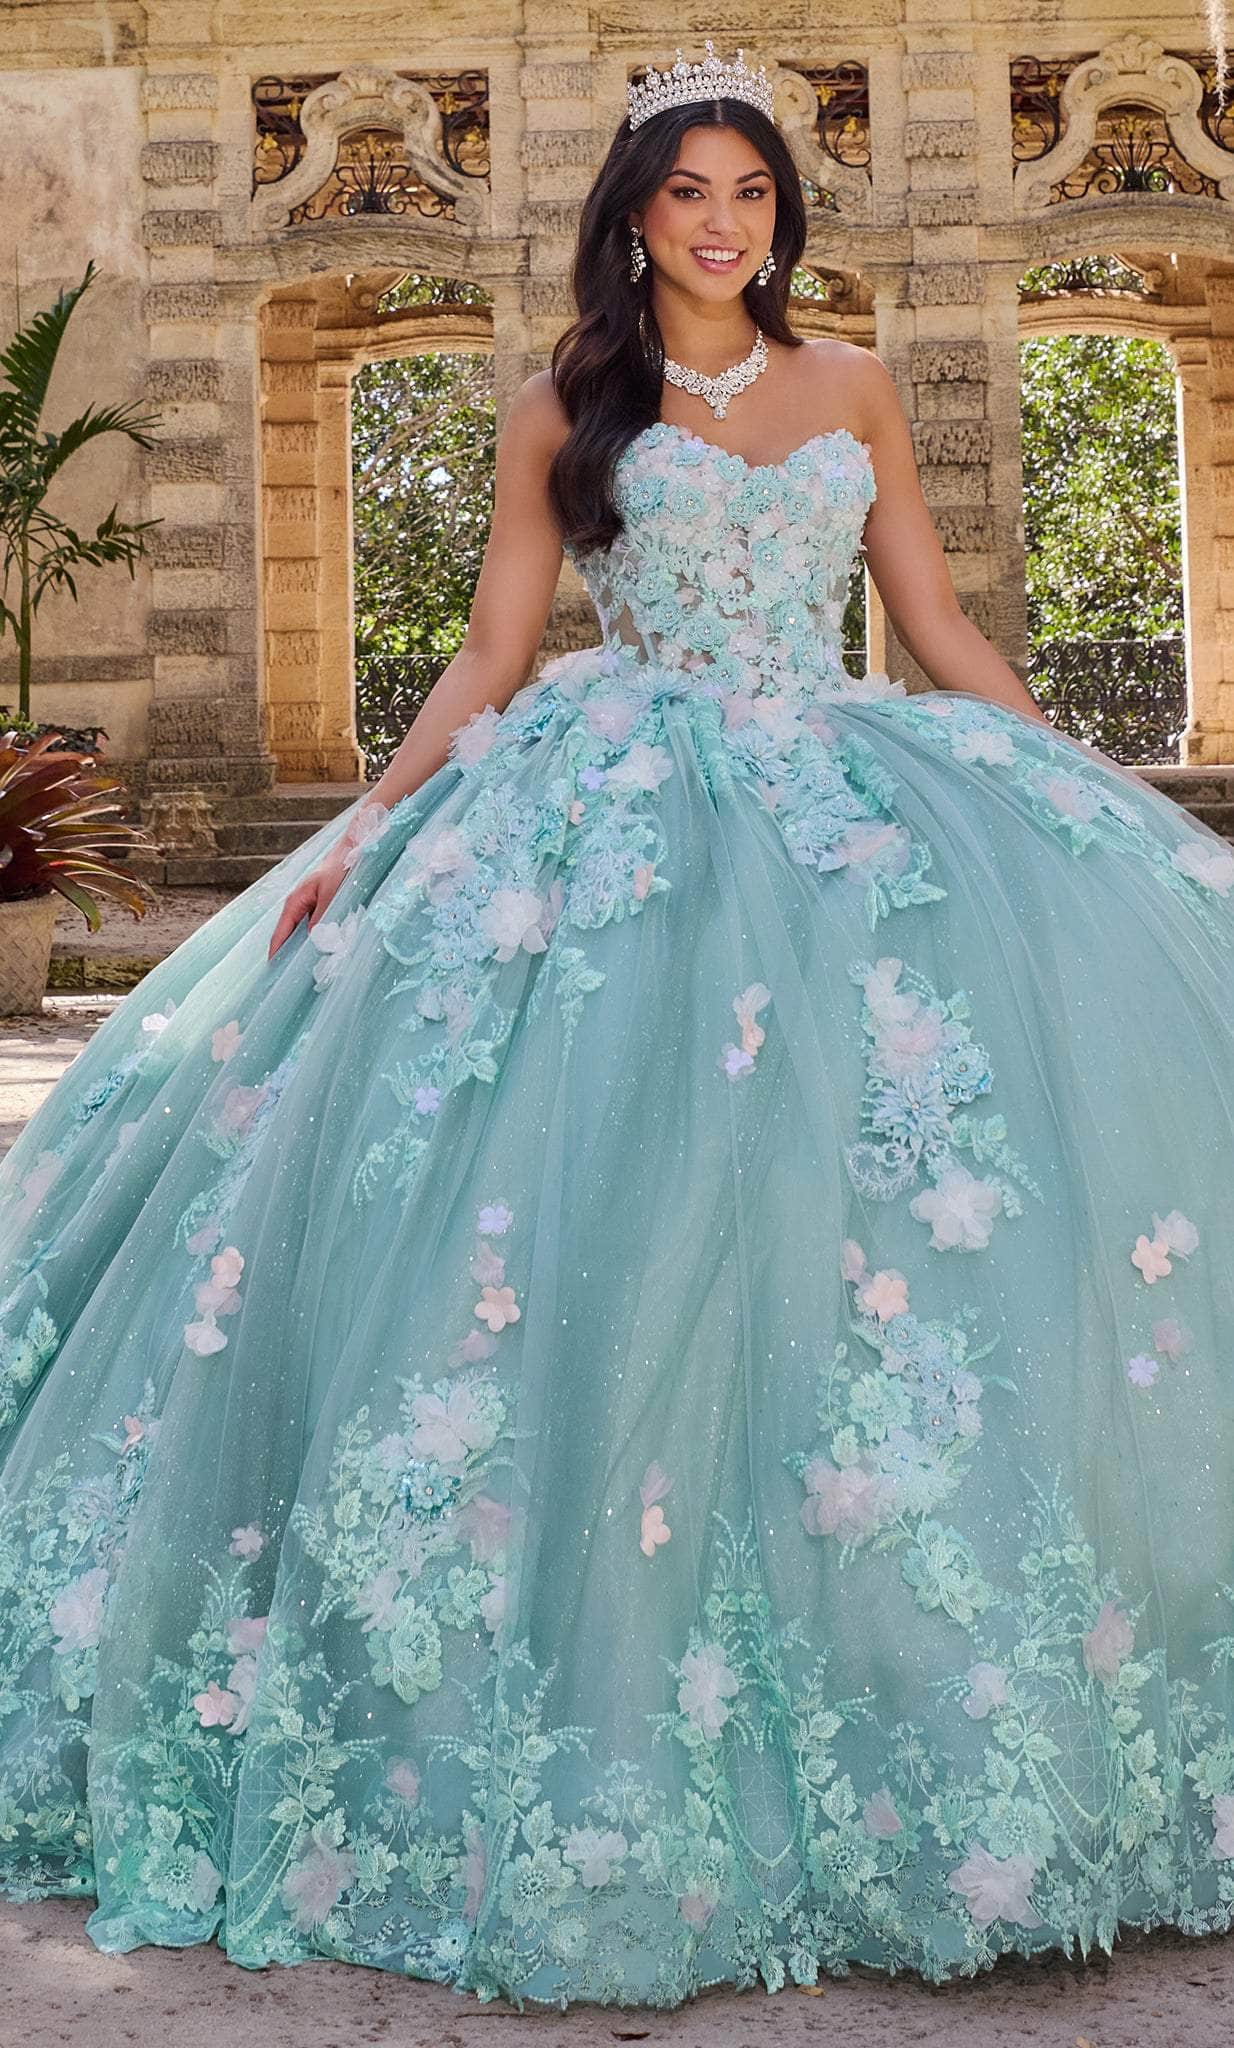 Image of Princesa by Ariana Vara PR30133 - Strapless Floral-Detailed Volume Gown